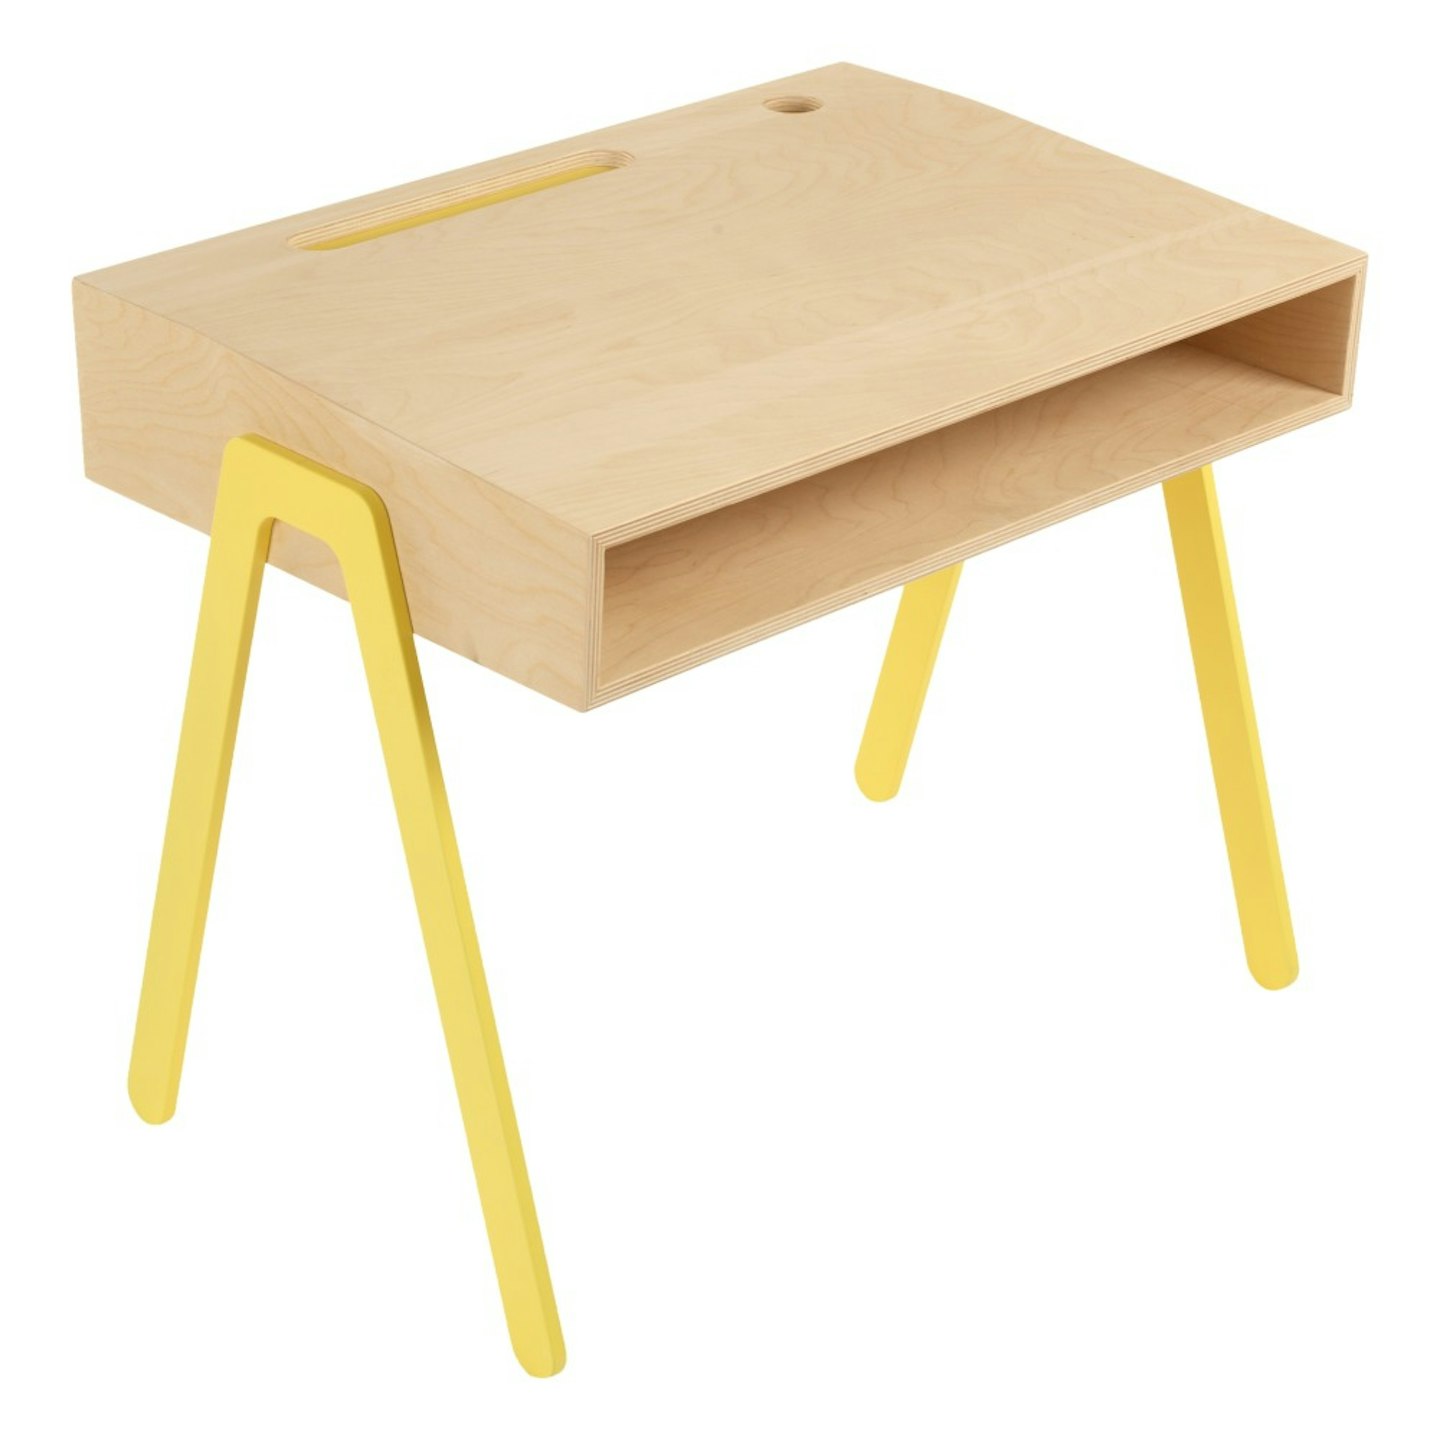 Yellow In2Wood Kids' Desk, Smallable